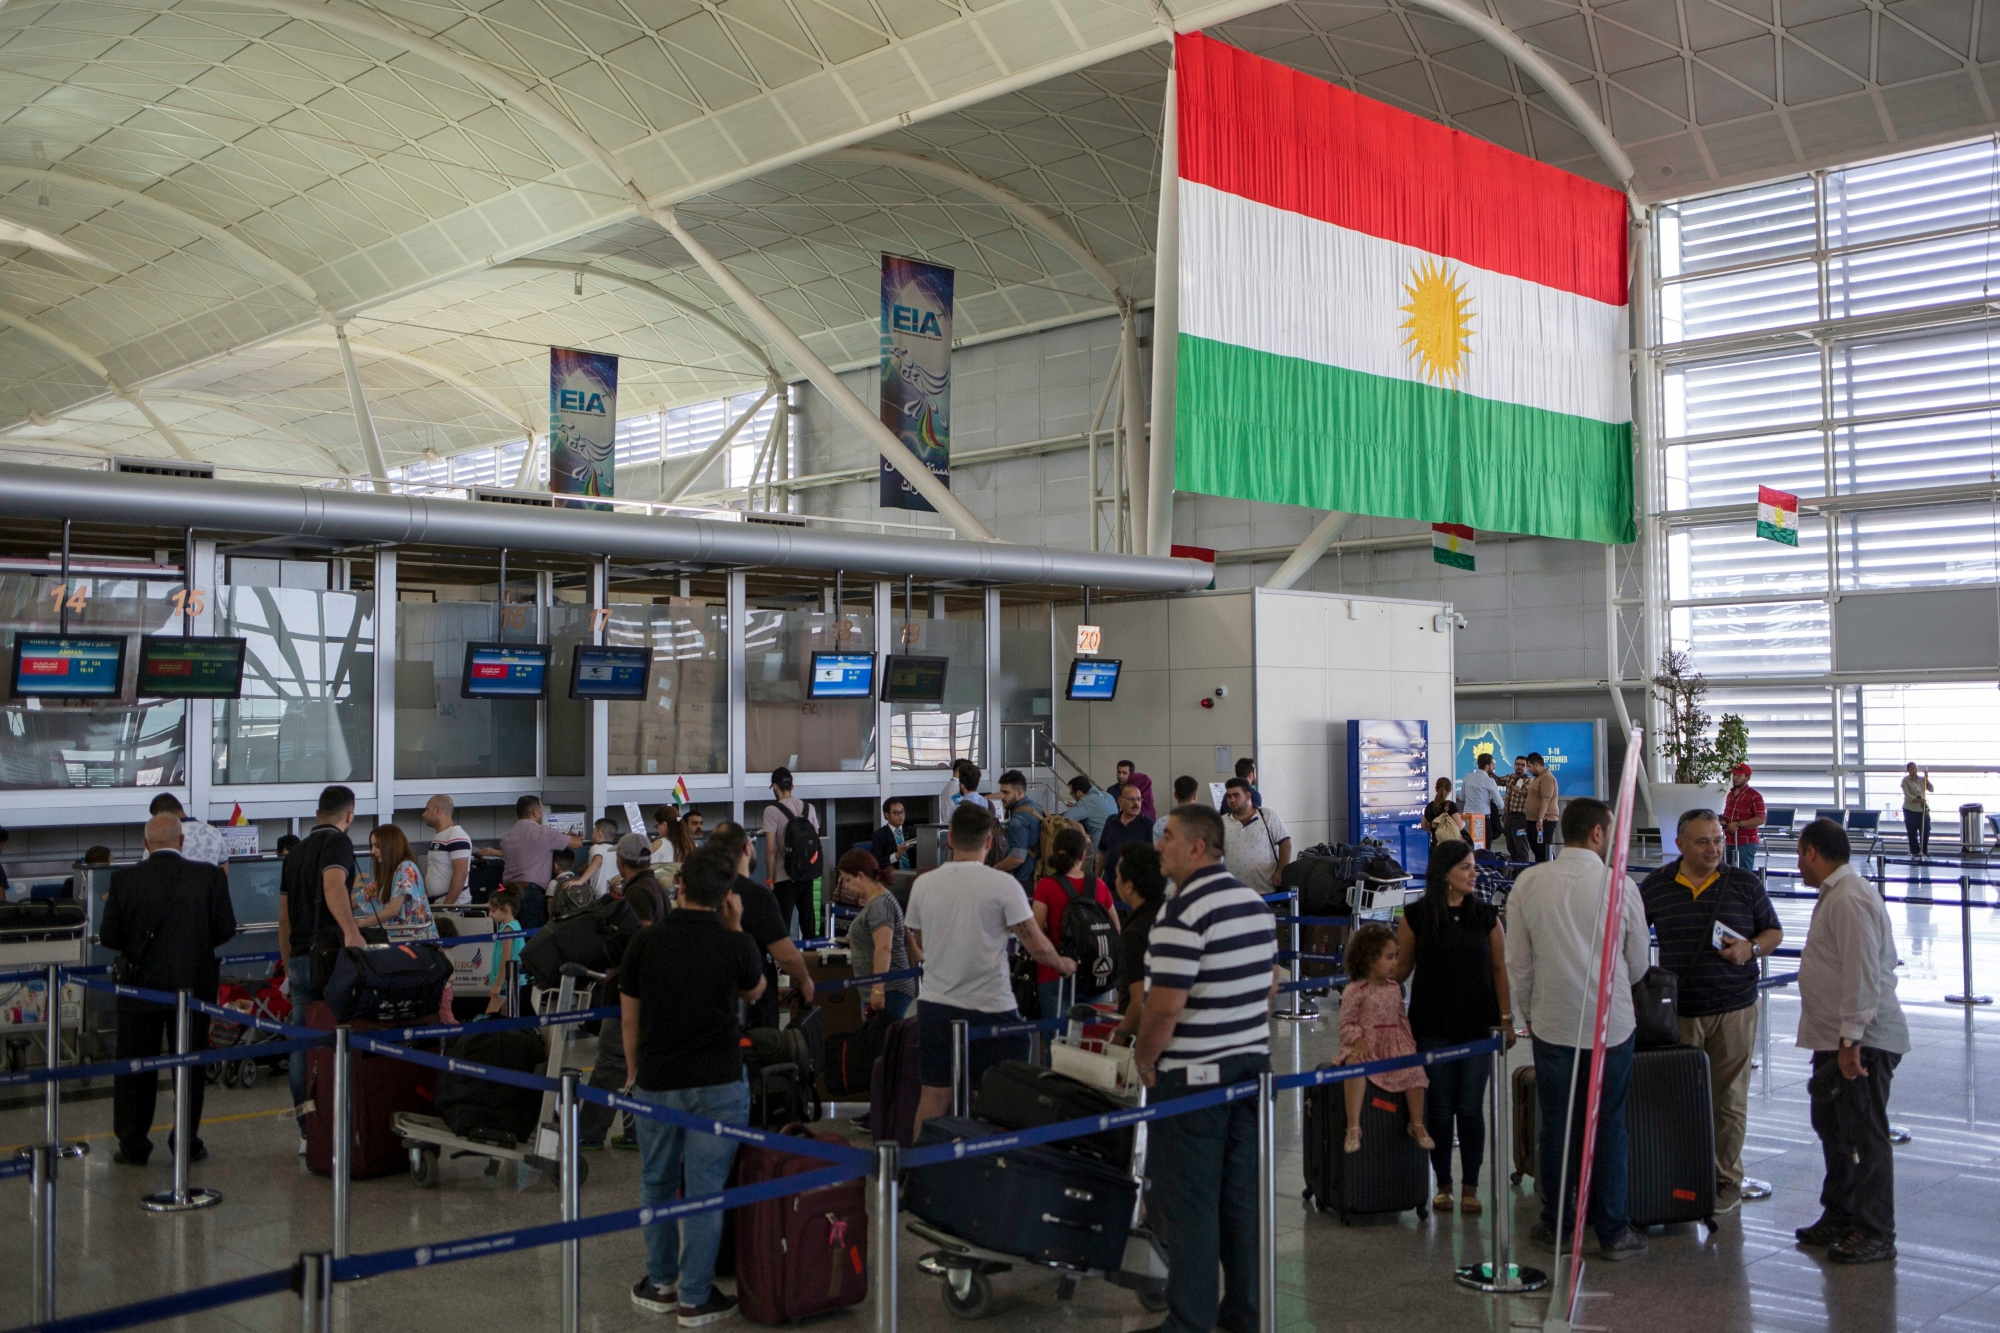 Travelers line up to check in at the Irbil International Airport, in Iraq, Wednesday, Sept. 27, 2017. Iraq's prime minister ordered the country's Kurdish region to hand over control of its airports to federal authorities or face a flight ban, a response to the Kurdish independence referendum. (AP Photo/Bram Janssen) Iraq